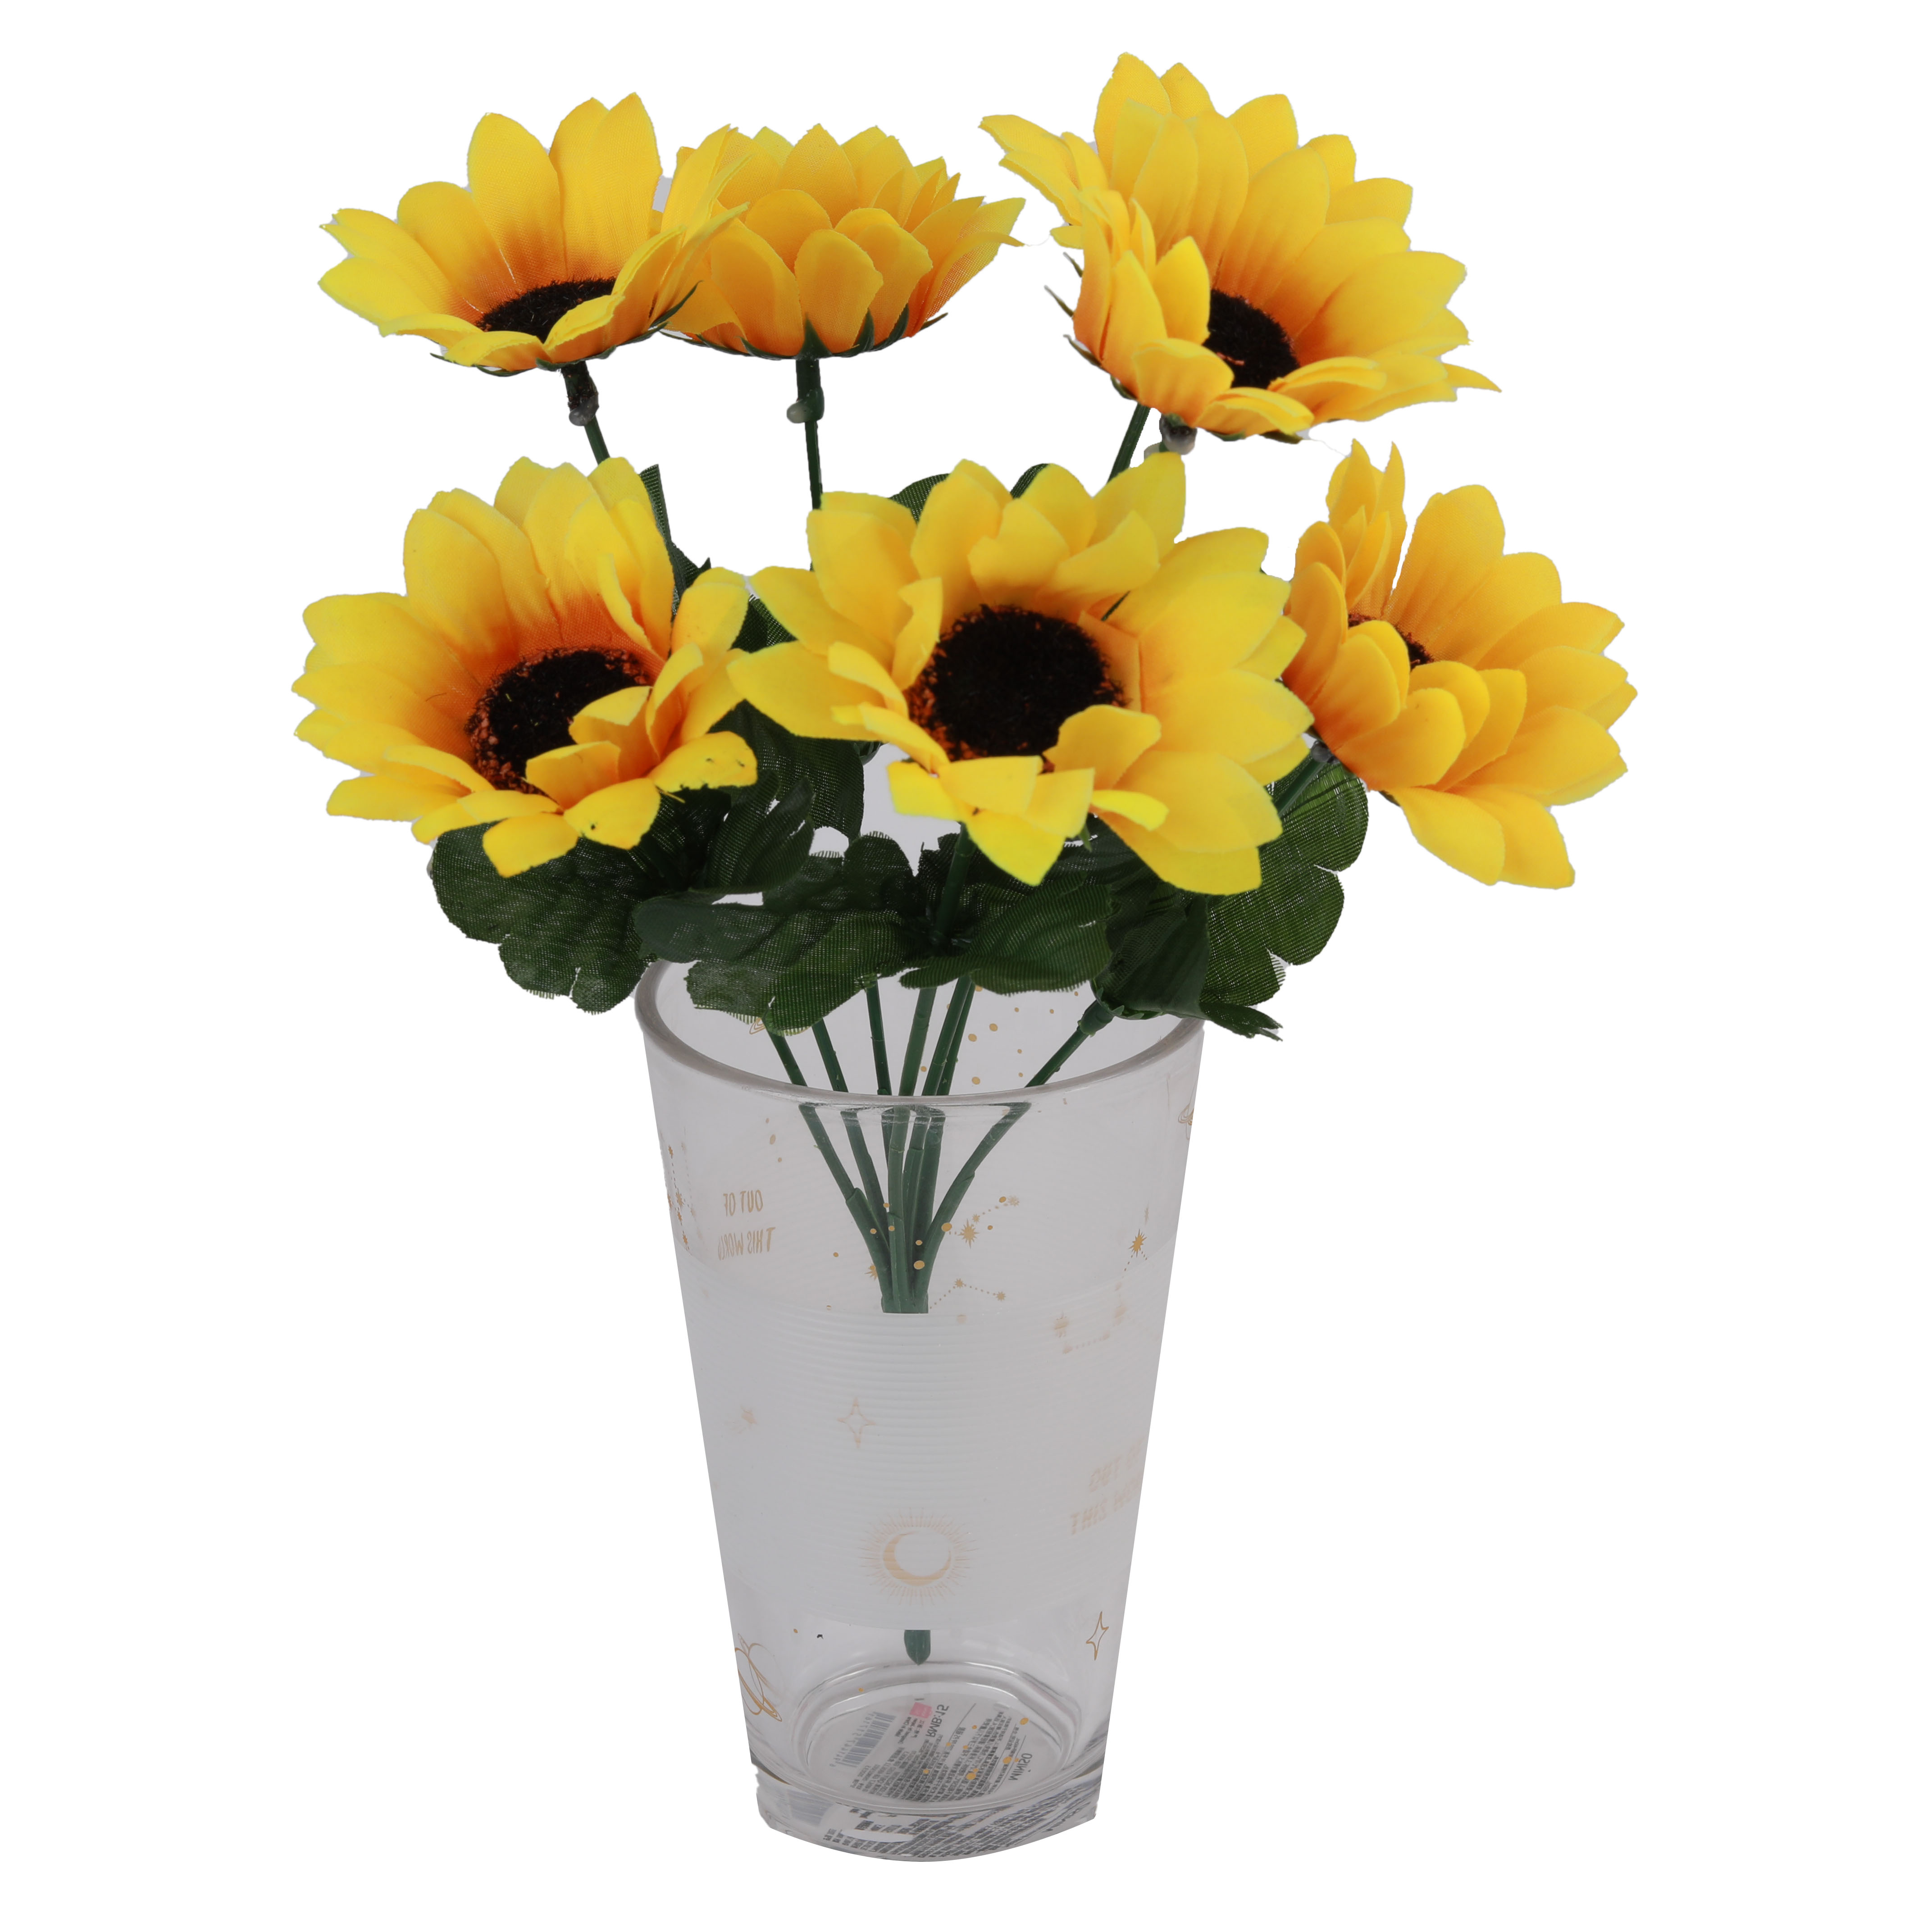 VKVL Beautiful artificial flowers Sunflower Bush With 7 Heads / 4 Blooms - Home Wedding Anniversary Grave By VKVL